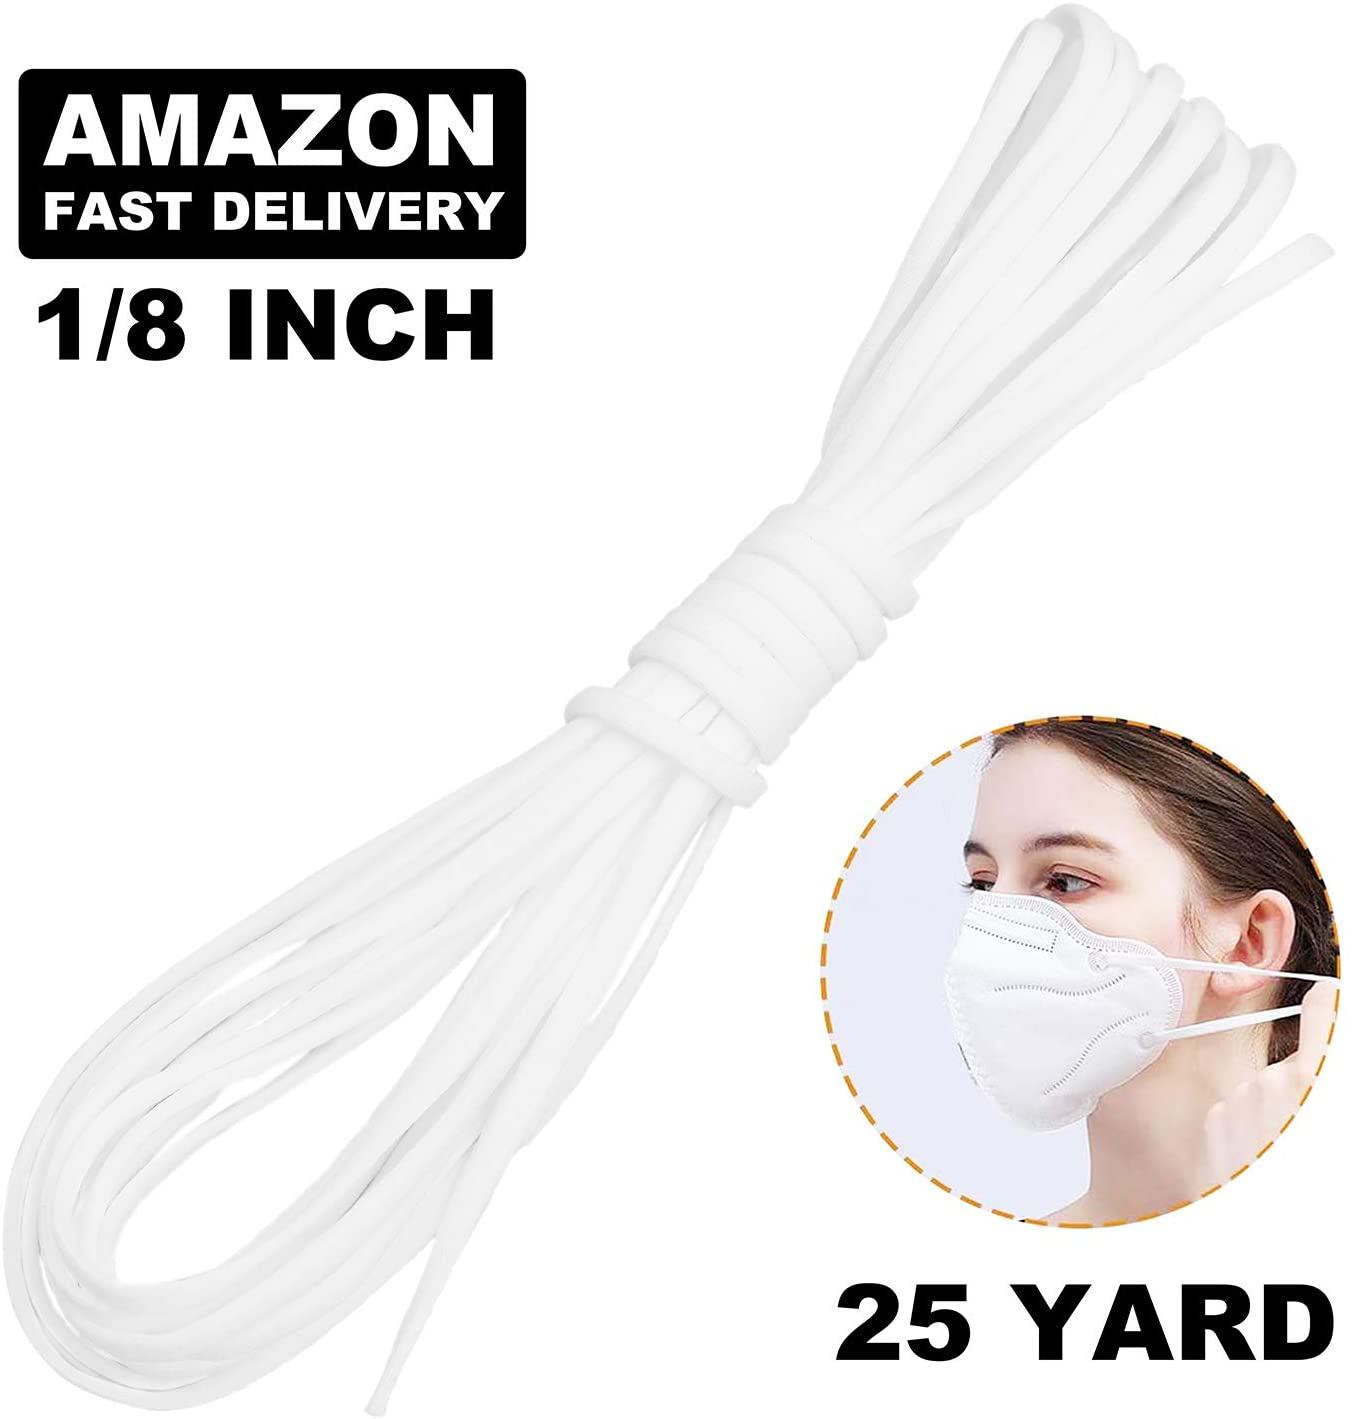 25 1:8 Inch Yard Elastic Cord DIY Cord for Sewing,Sewing Cord Elastic Bands Rope Crafting Stretch DIY Ear Band Loop White